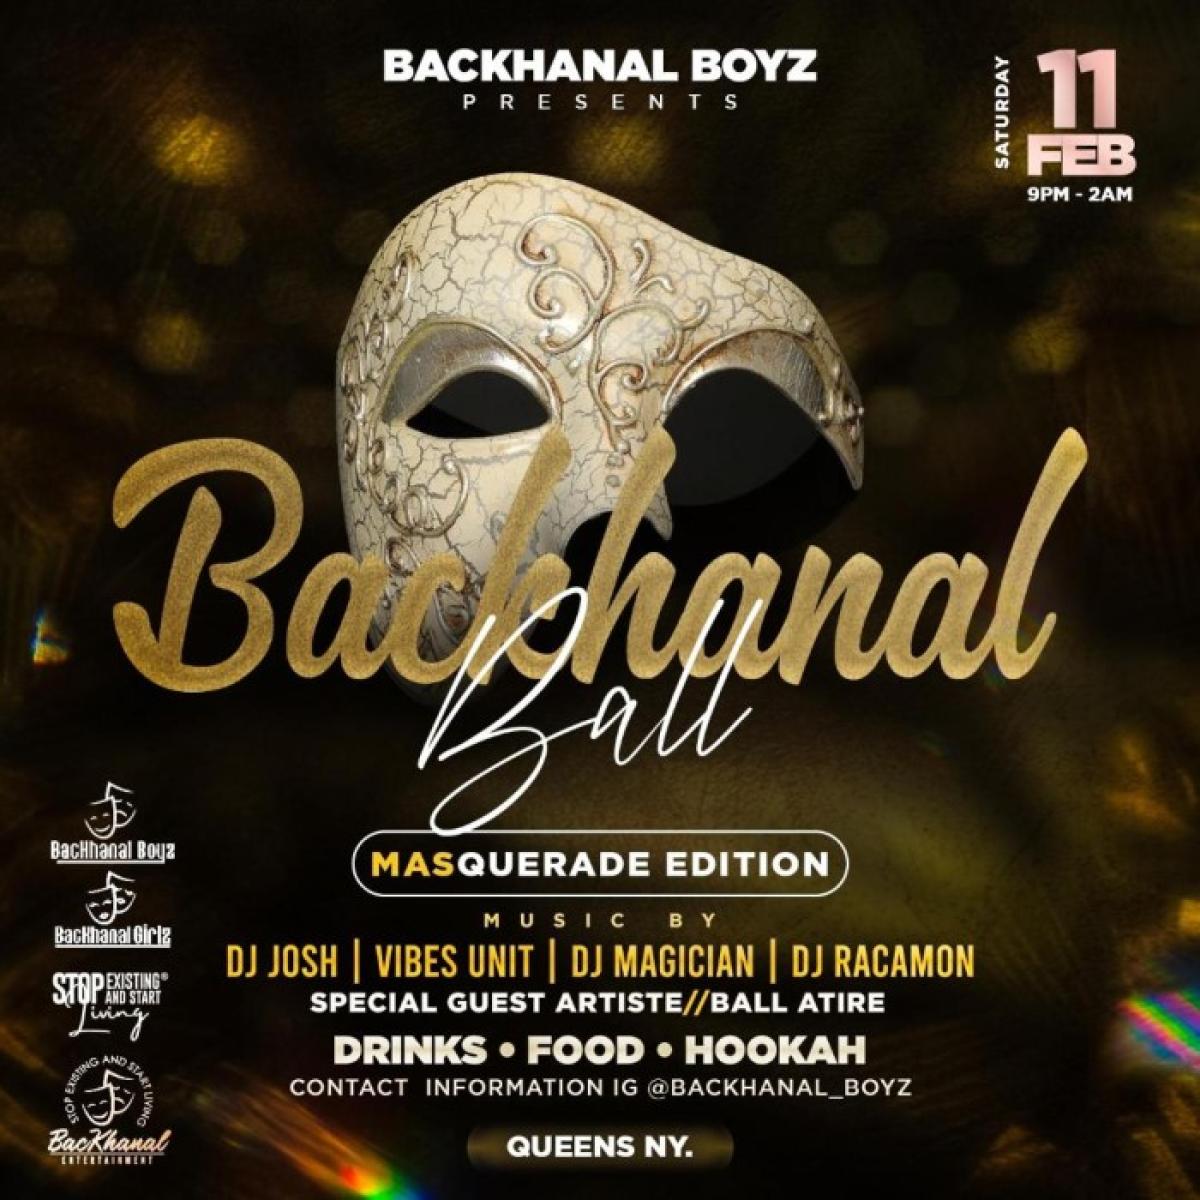 Backhanal Ball- The Masquerade Edition flyer or graphic.